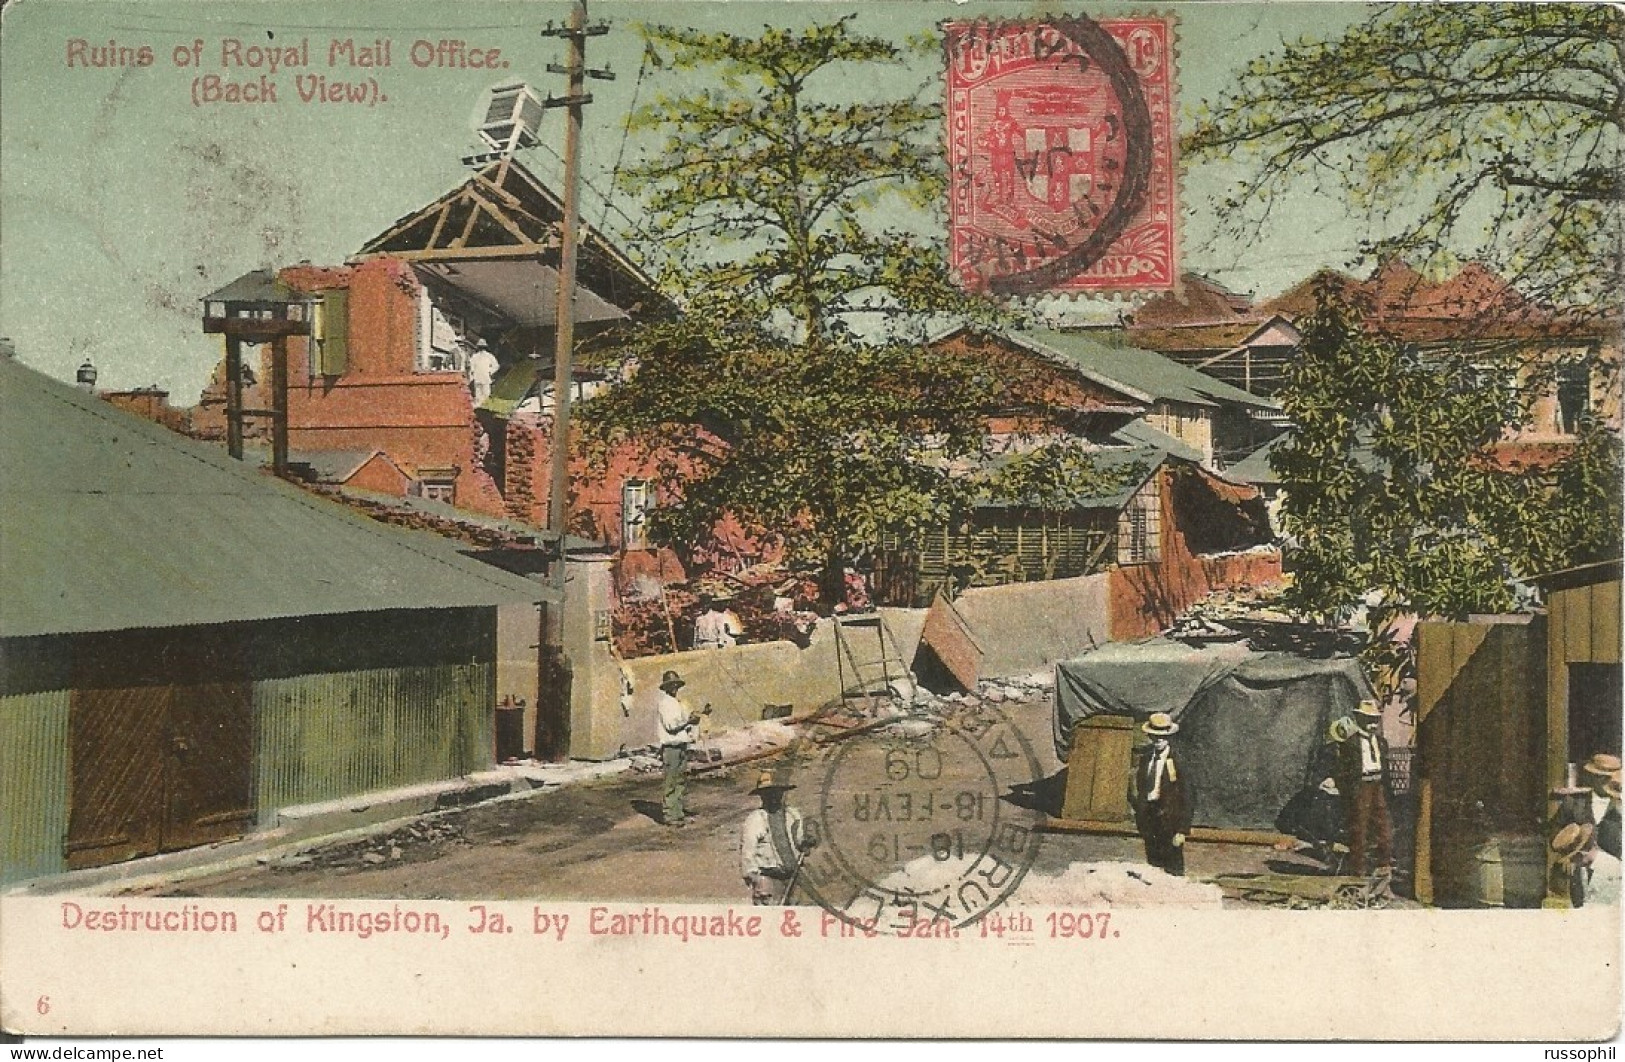 JAMAICA - DESTRUCTION OF KINGSTON, BY EARTHQUAKE AND FIRE JAN 14TH 1907 - RUINS OF ROYAL MAIL OFFICE - 1909 - Jamaïque